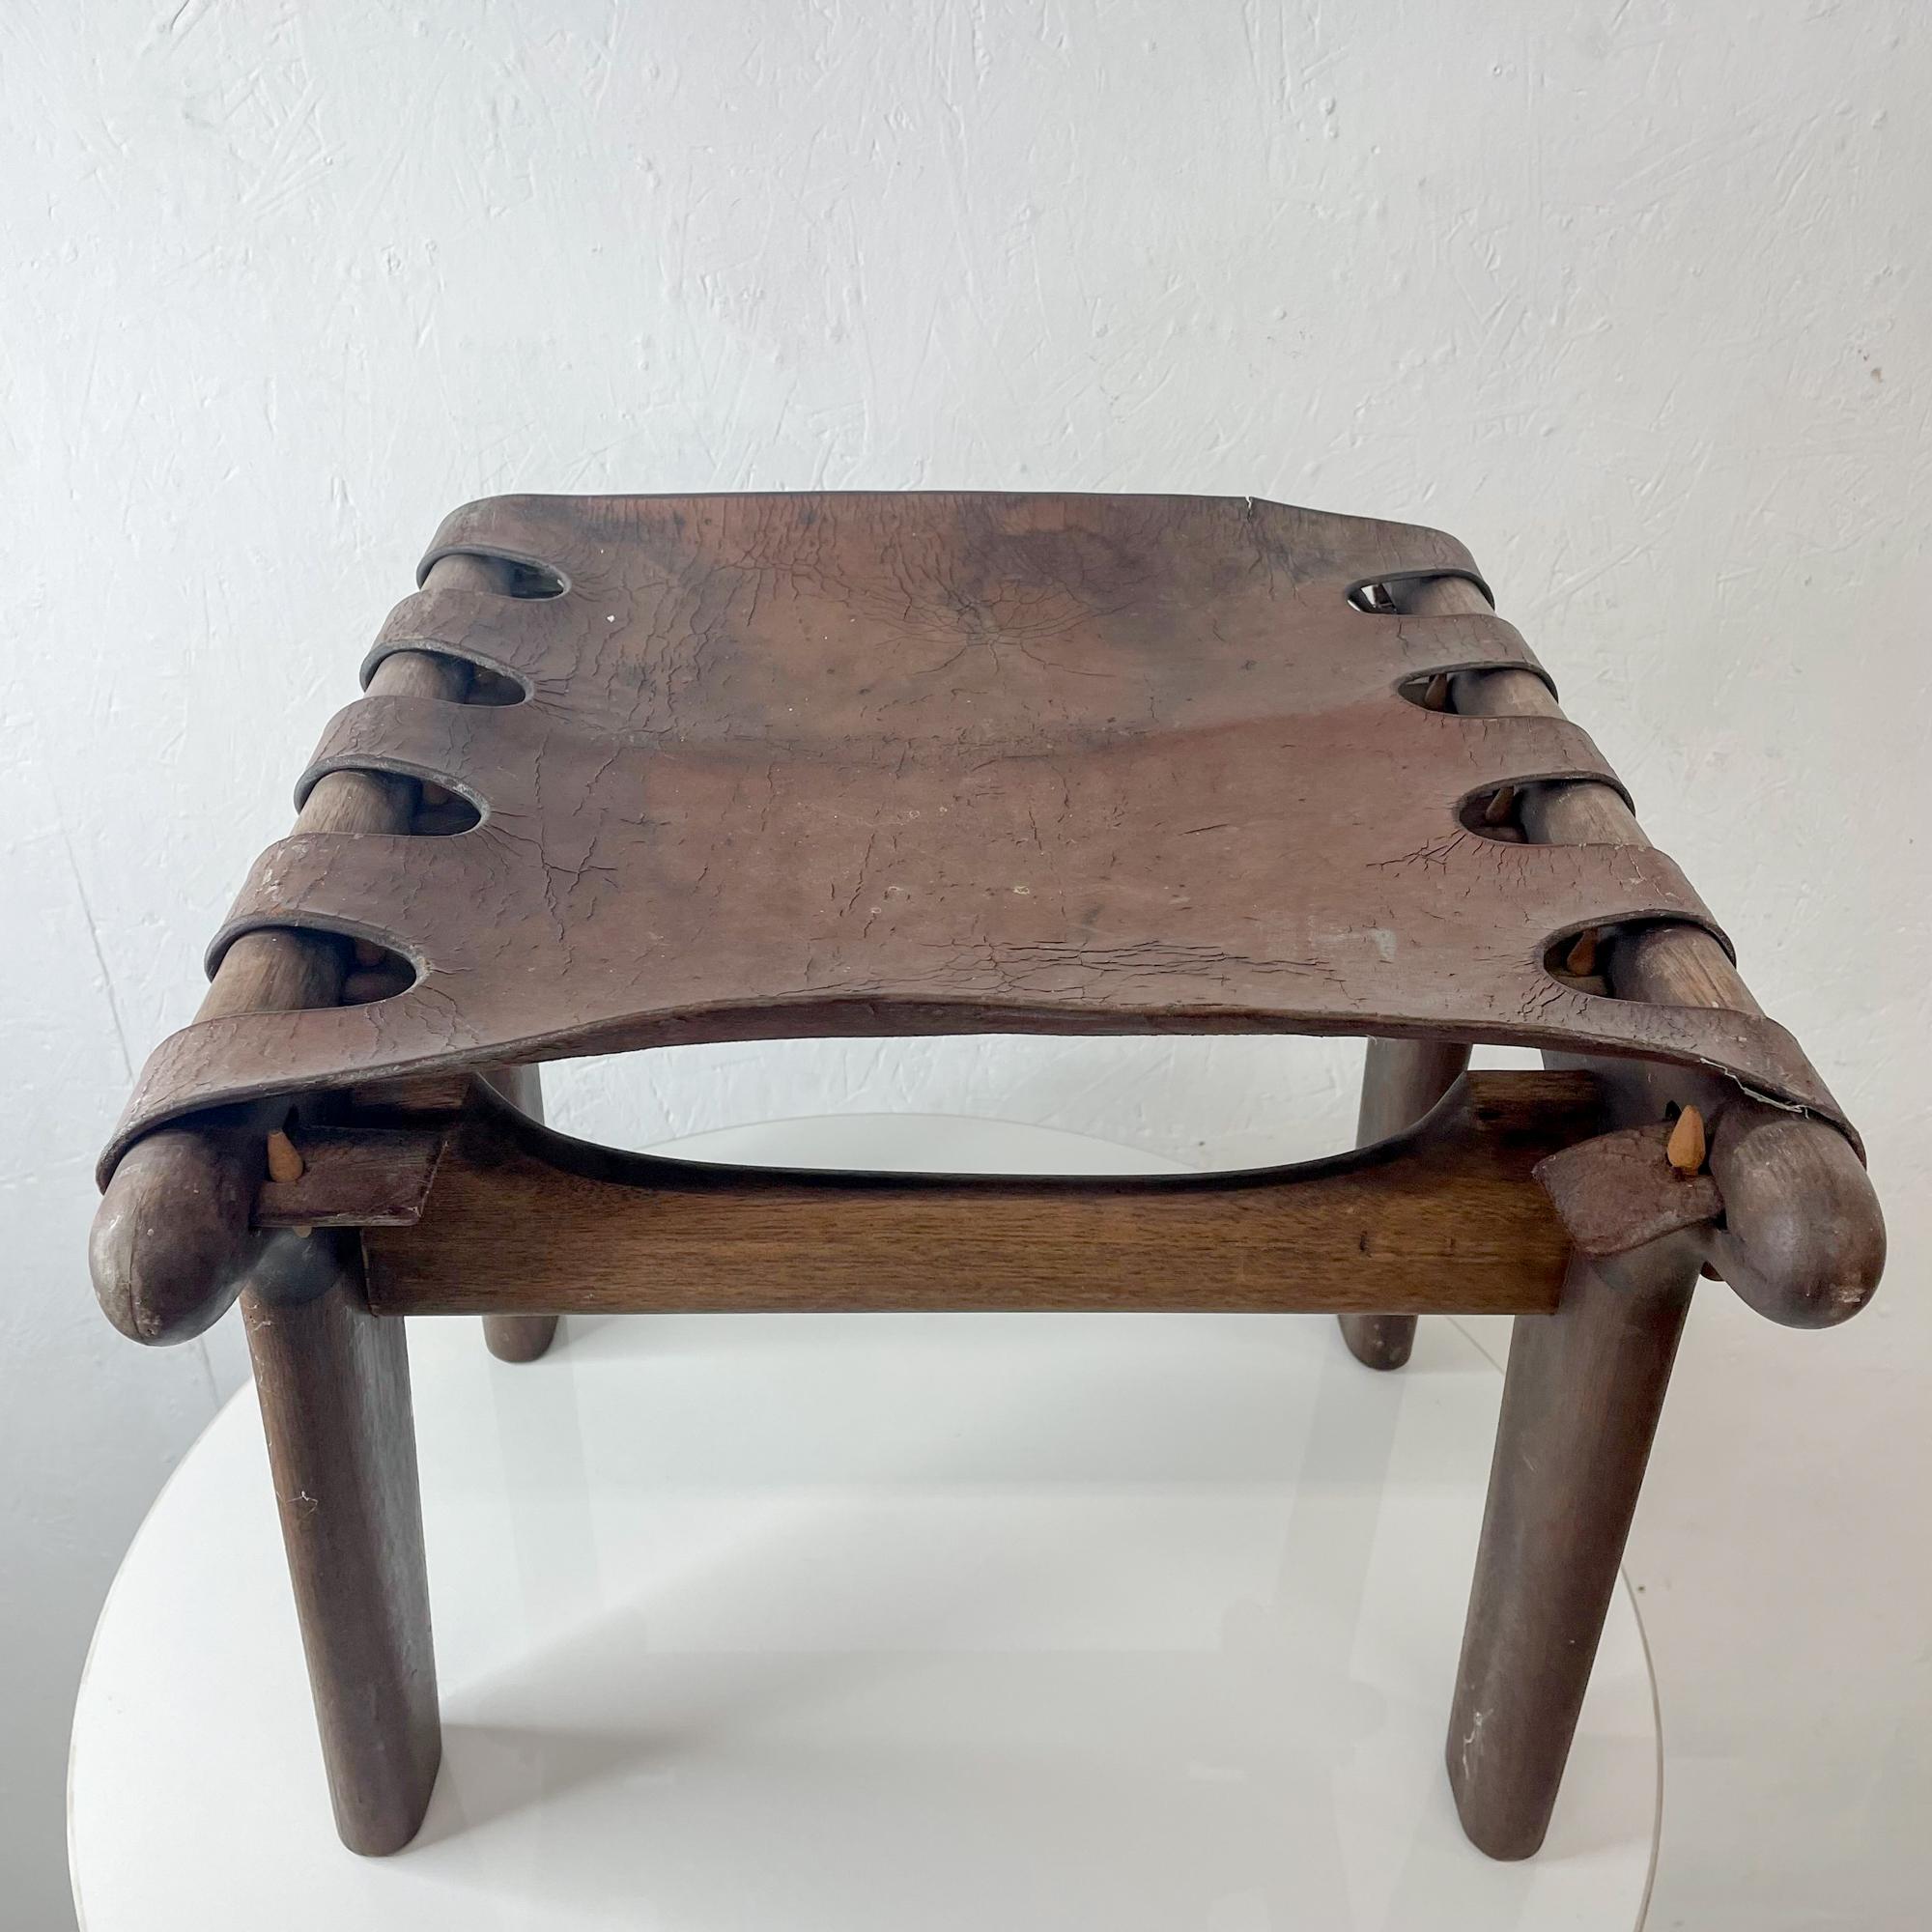 Pazmino stool
Fabulous vintage footrest stool ottoman designed by Angel Pazmino of Ecuador 1960s.
Designed in Solid sculptural wood a la Nakashima with Leather Strappy top in whip stitch.
14 H x 17.75 D x 19 W inches
Preowned Original vintage